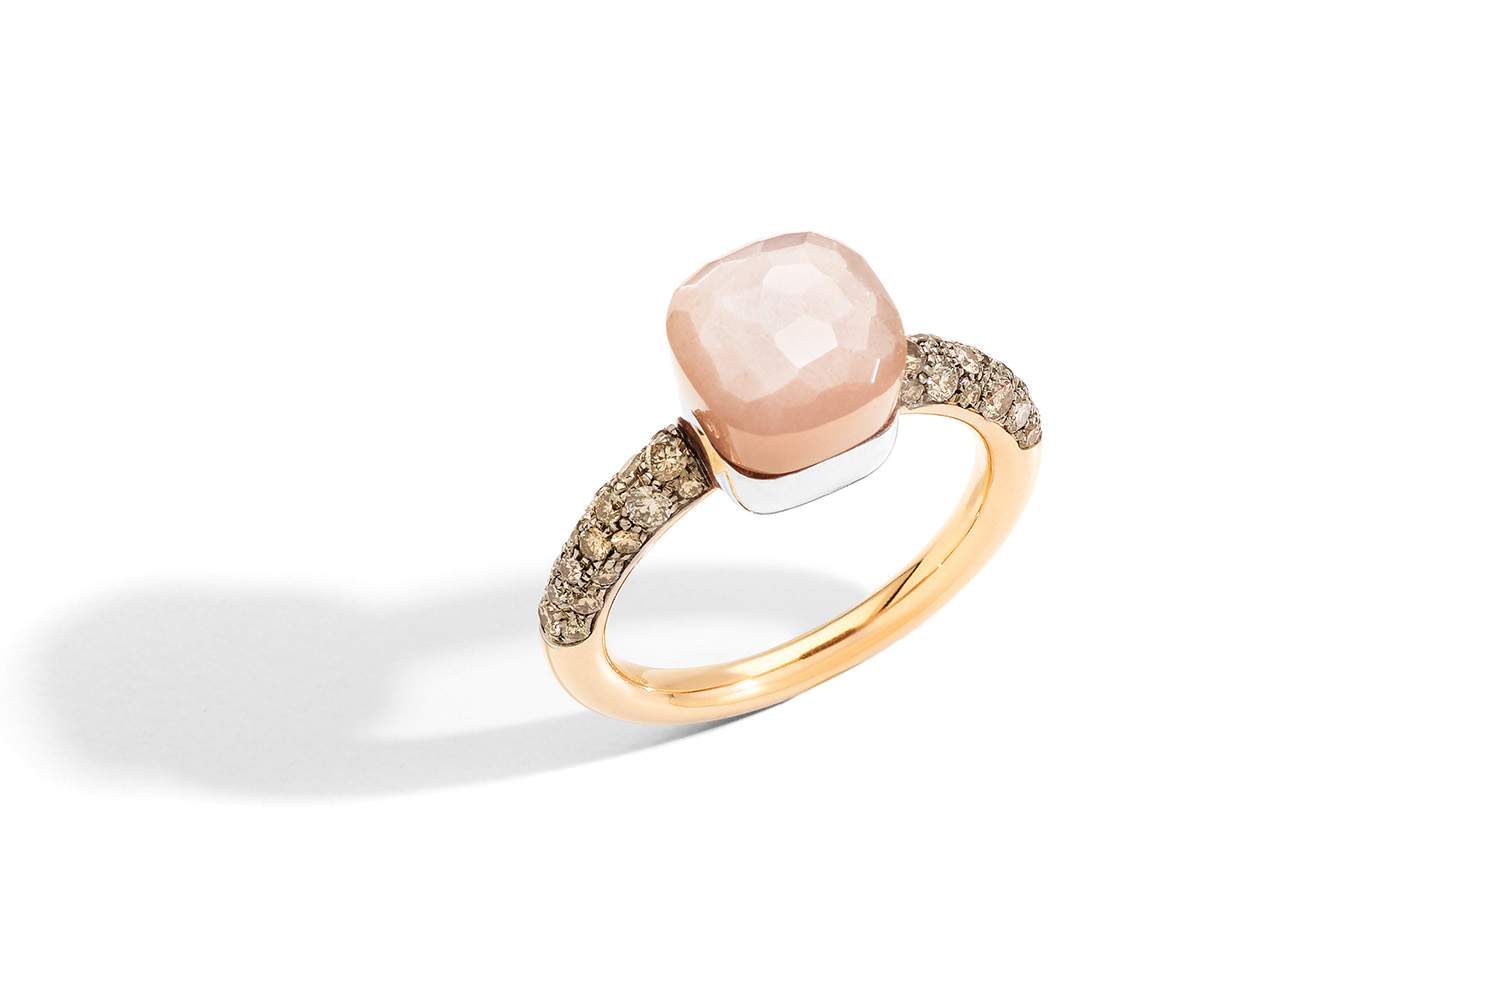 NUDO-CHOCOLATE-petit-ring-in-rose-gold-with-light-brown-moonstone-and-brown-diamonds-by-Pomellato-–-kopia